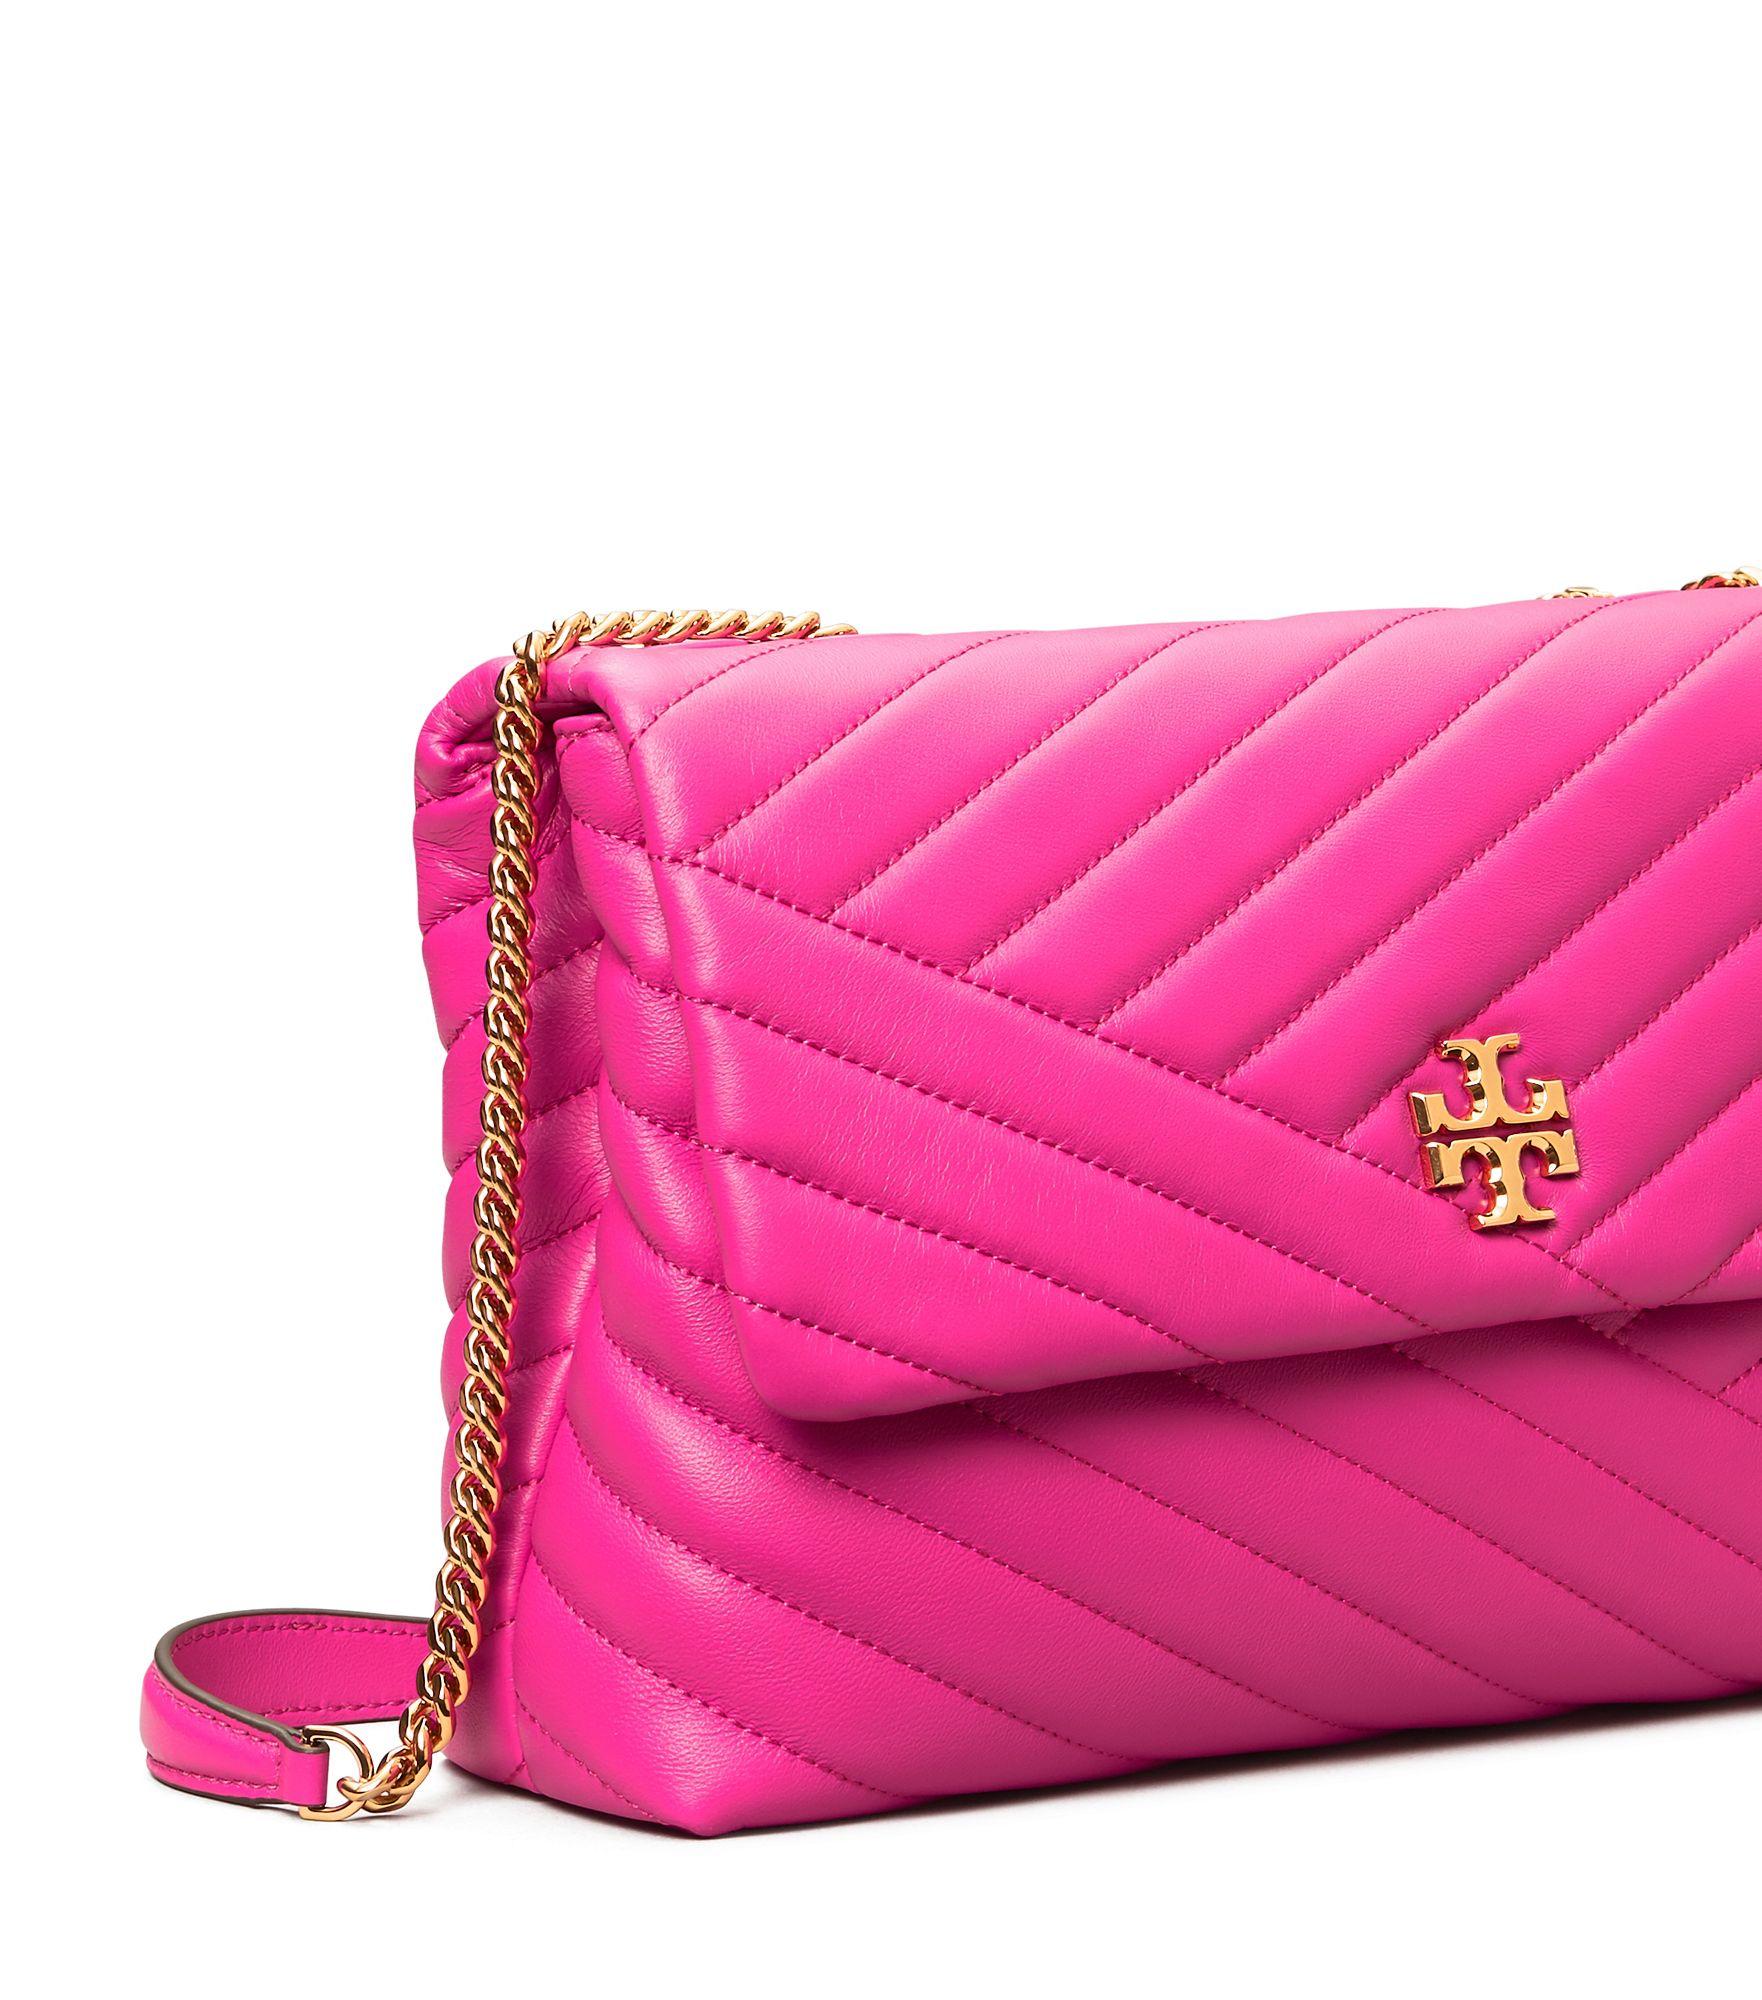 Tory Burch Leather Kira Quilted Cross Body Bag in Violet (Pink) - Lyst